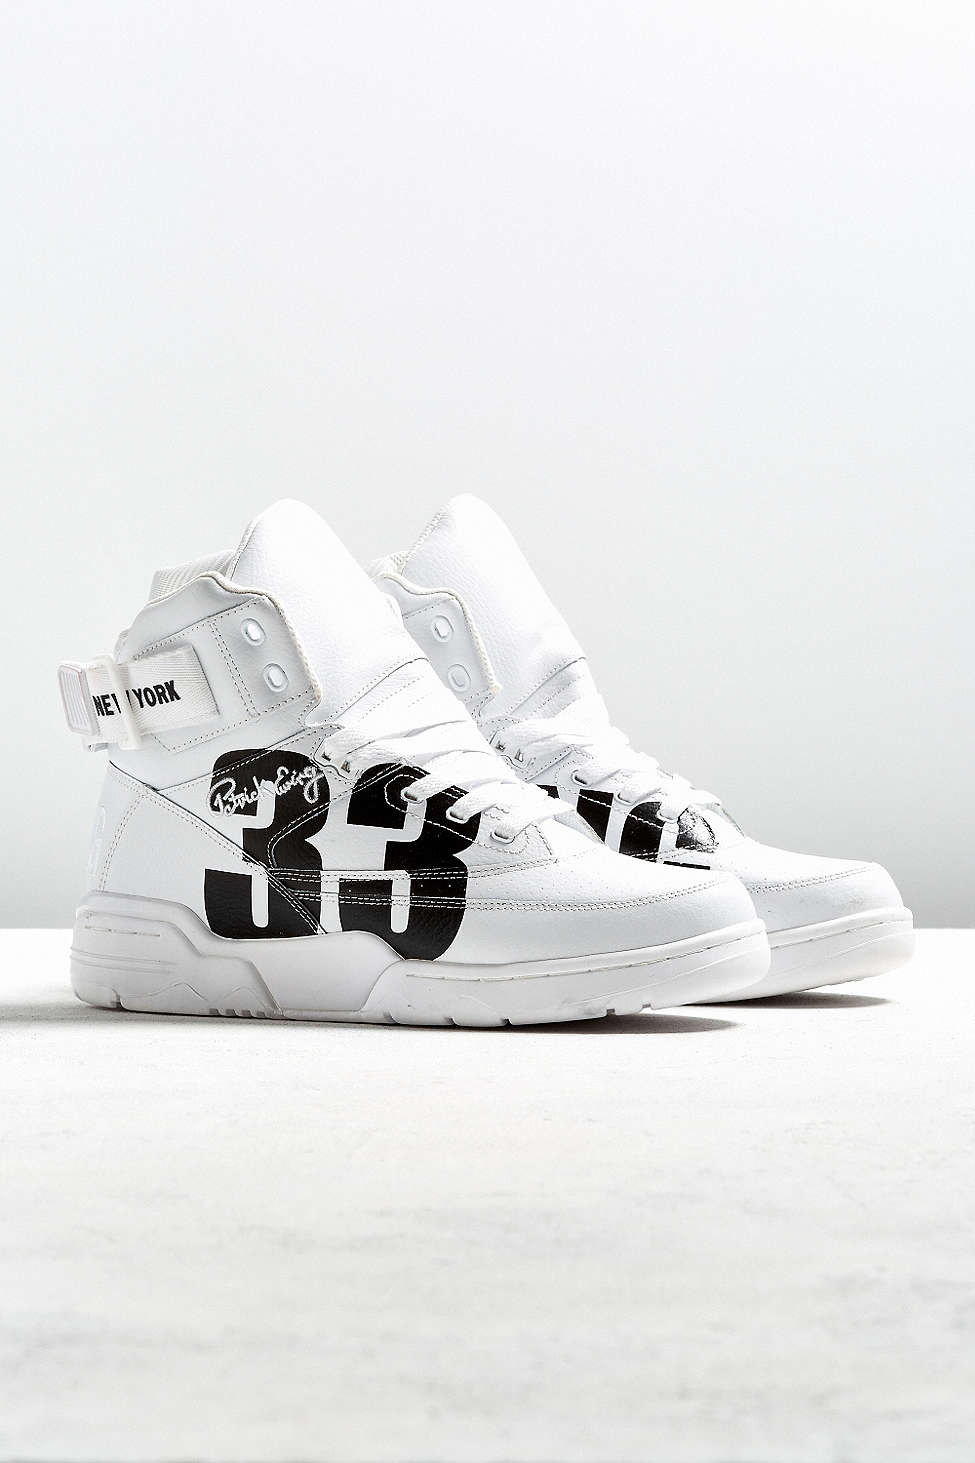 urban outfitters x ewing 33 hi NYC white black 4